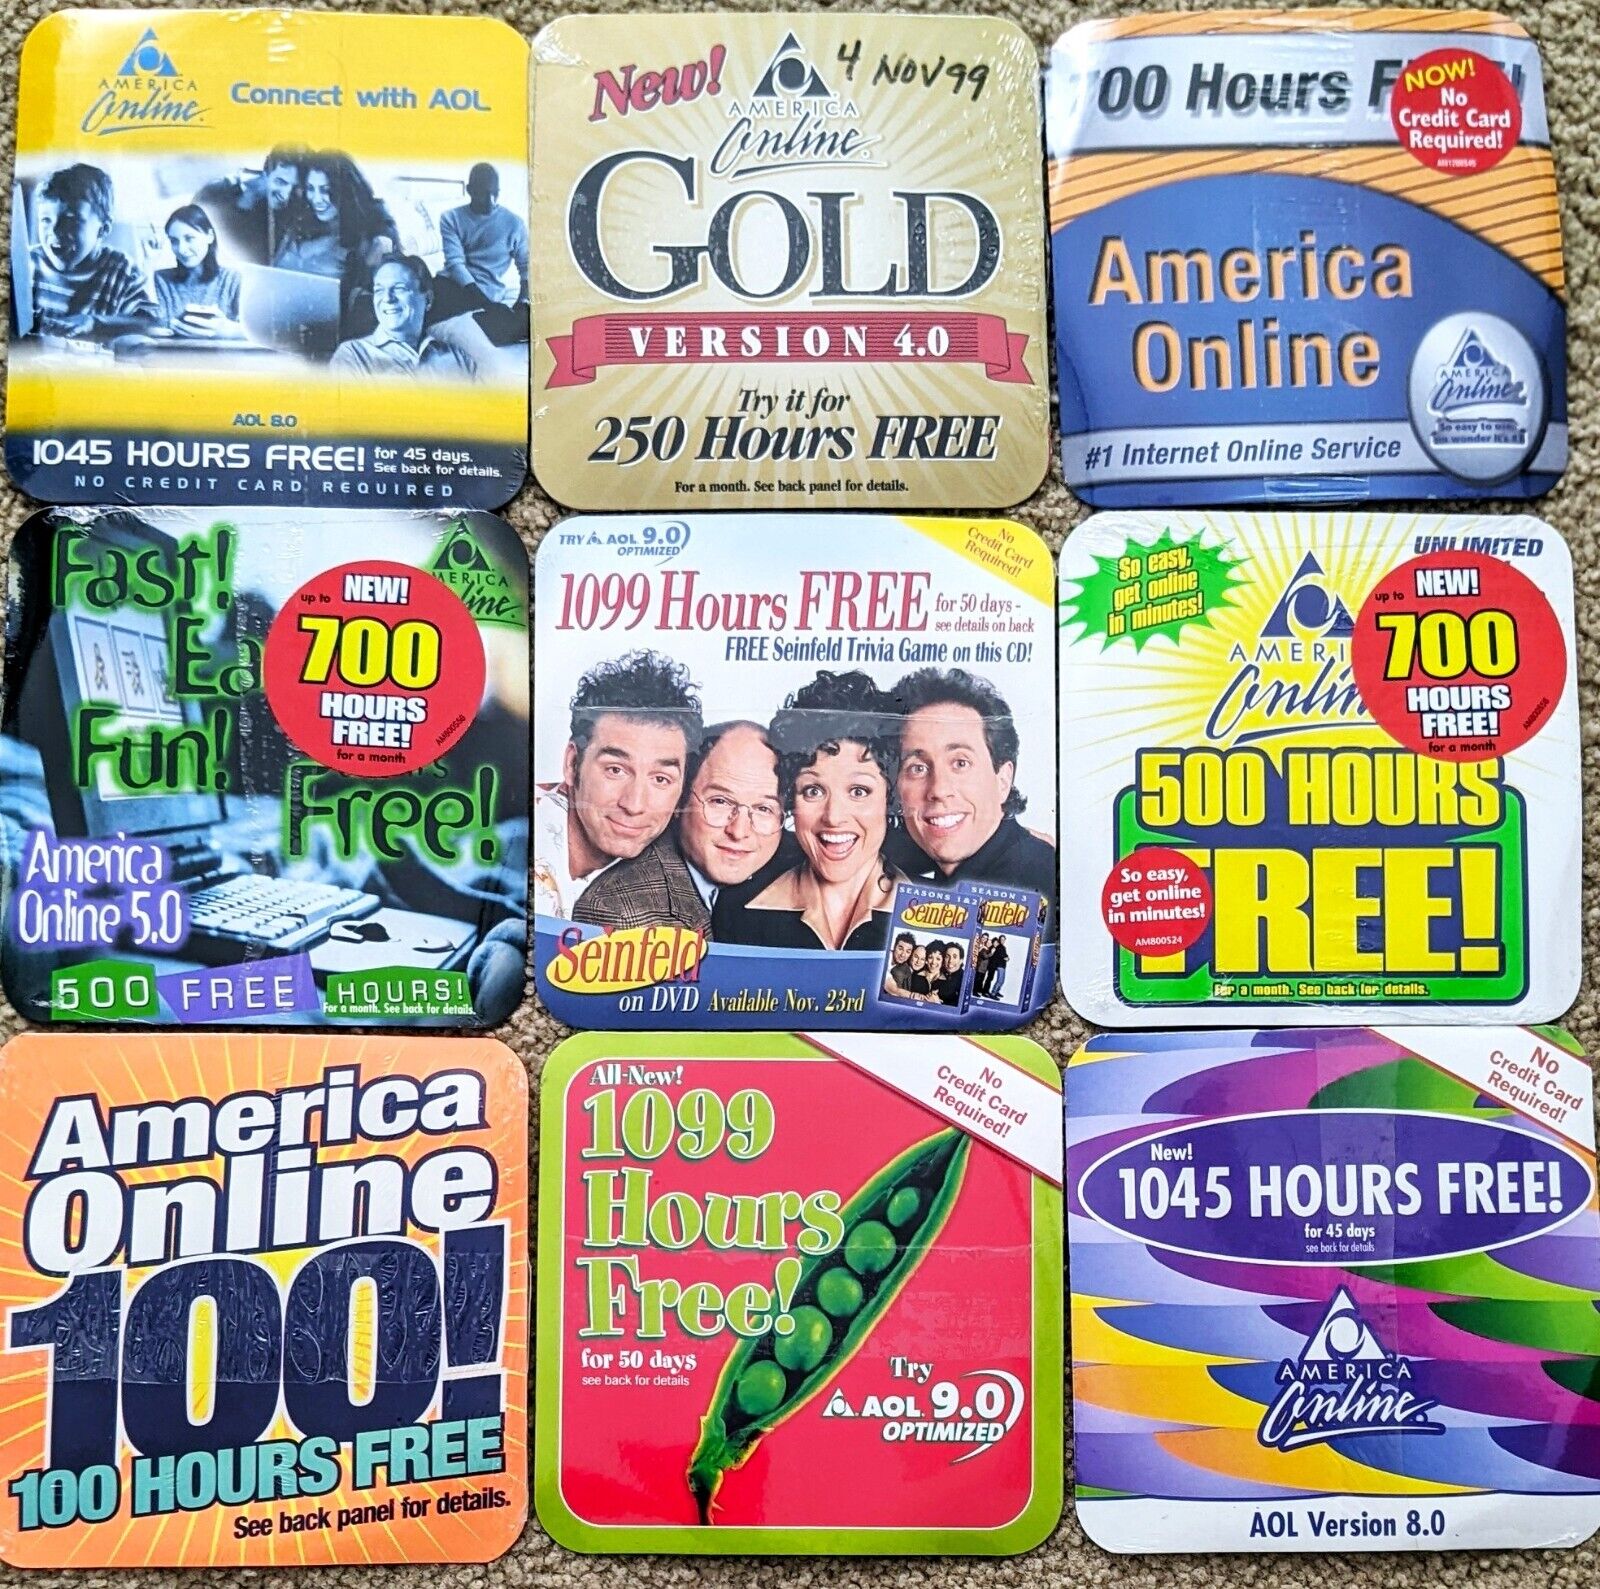 LOT of 9 America Online Collectible / Install Discs, AOL CD Versions 3.0-9.0